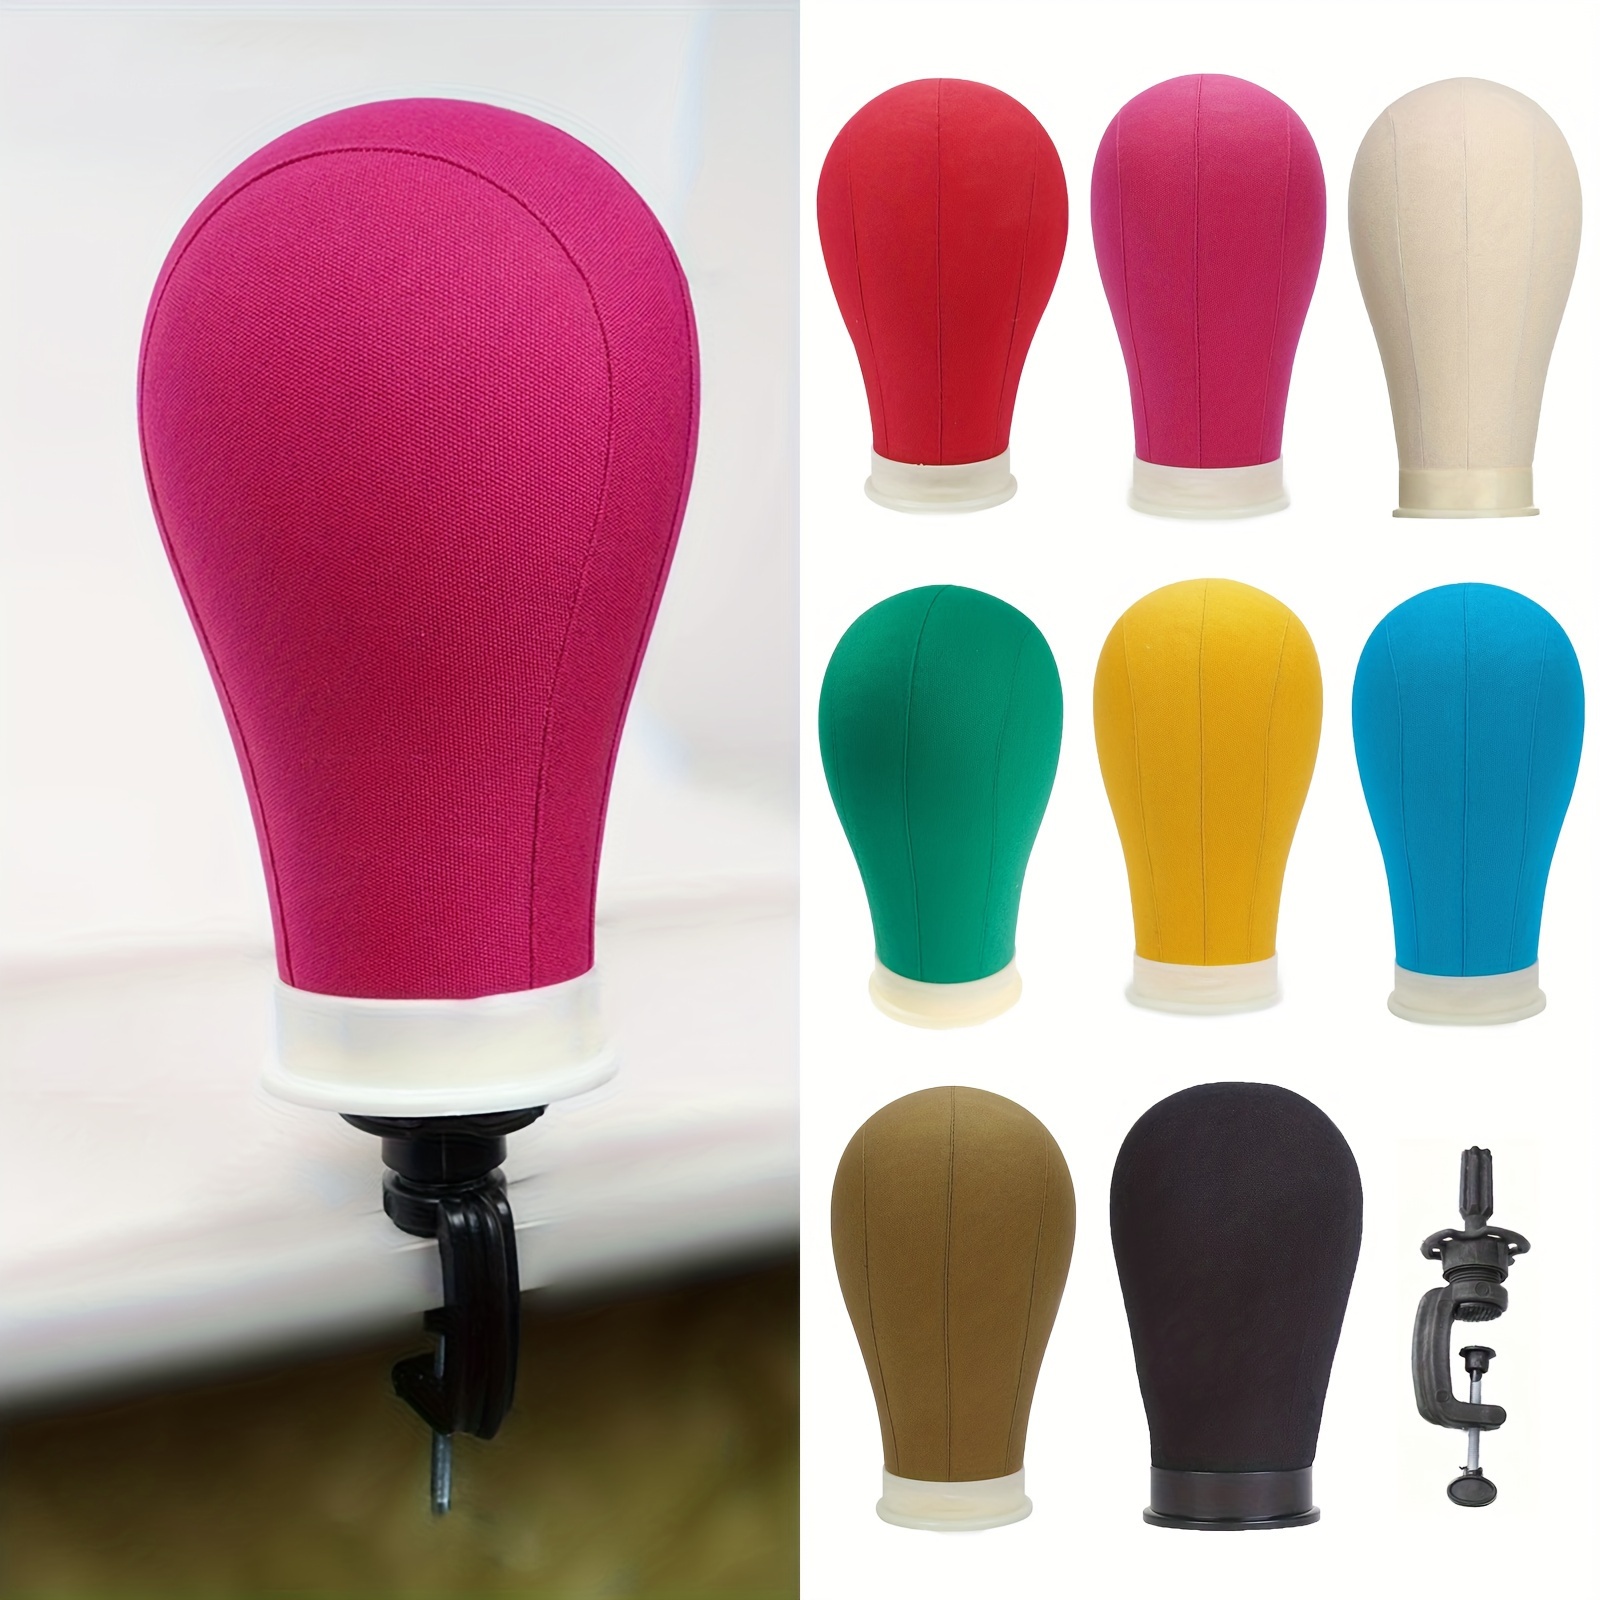 22 Inch Wig Head/Stand Tripod With Head, Canvas, Mannequin Head